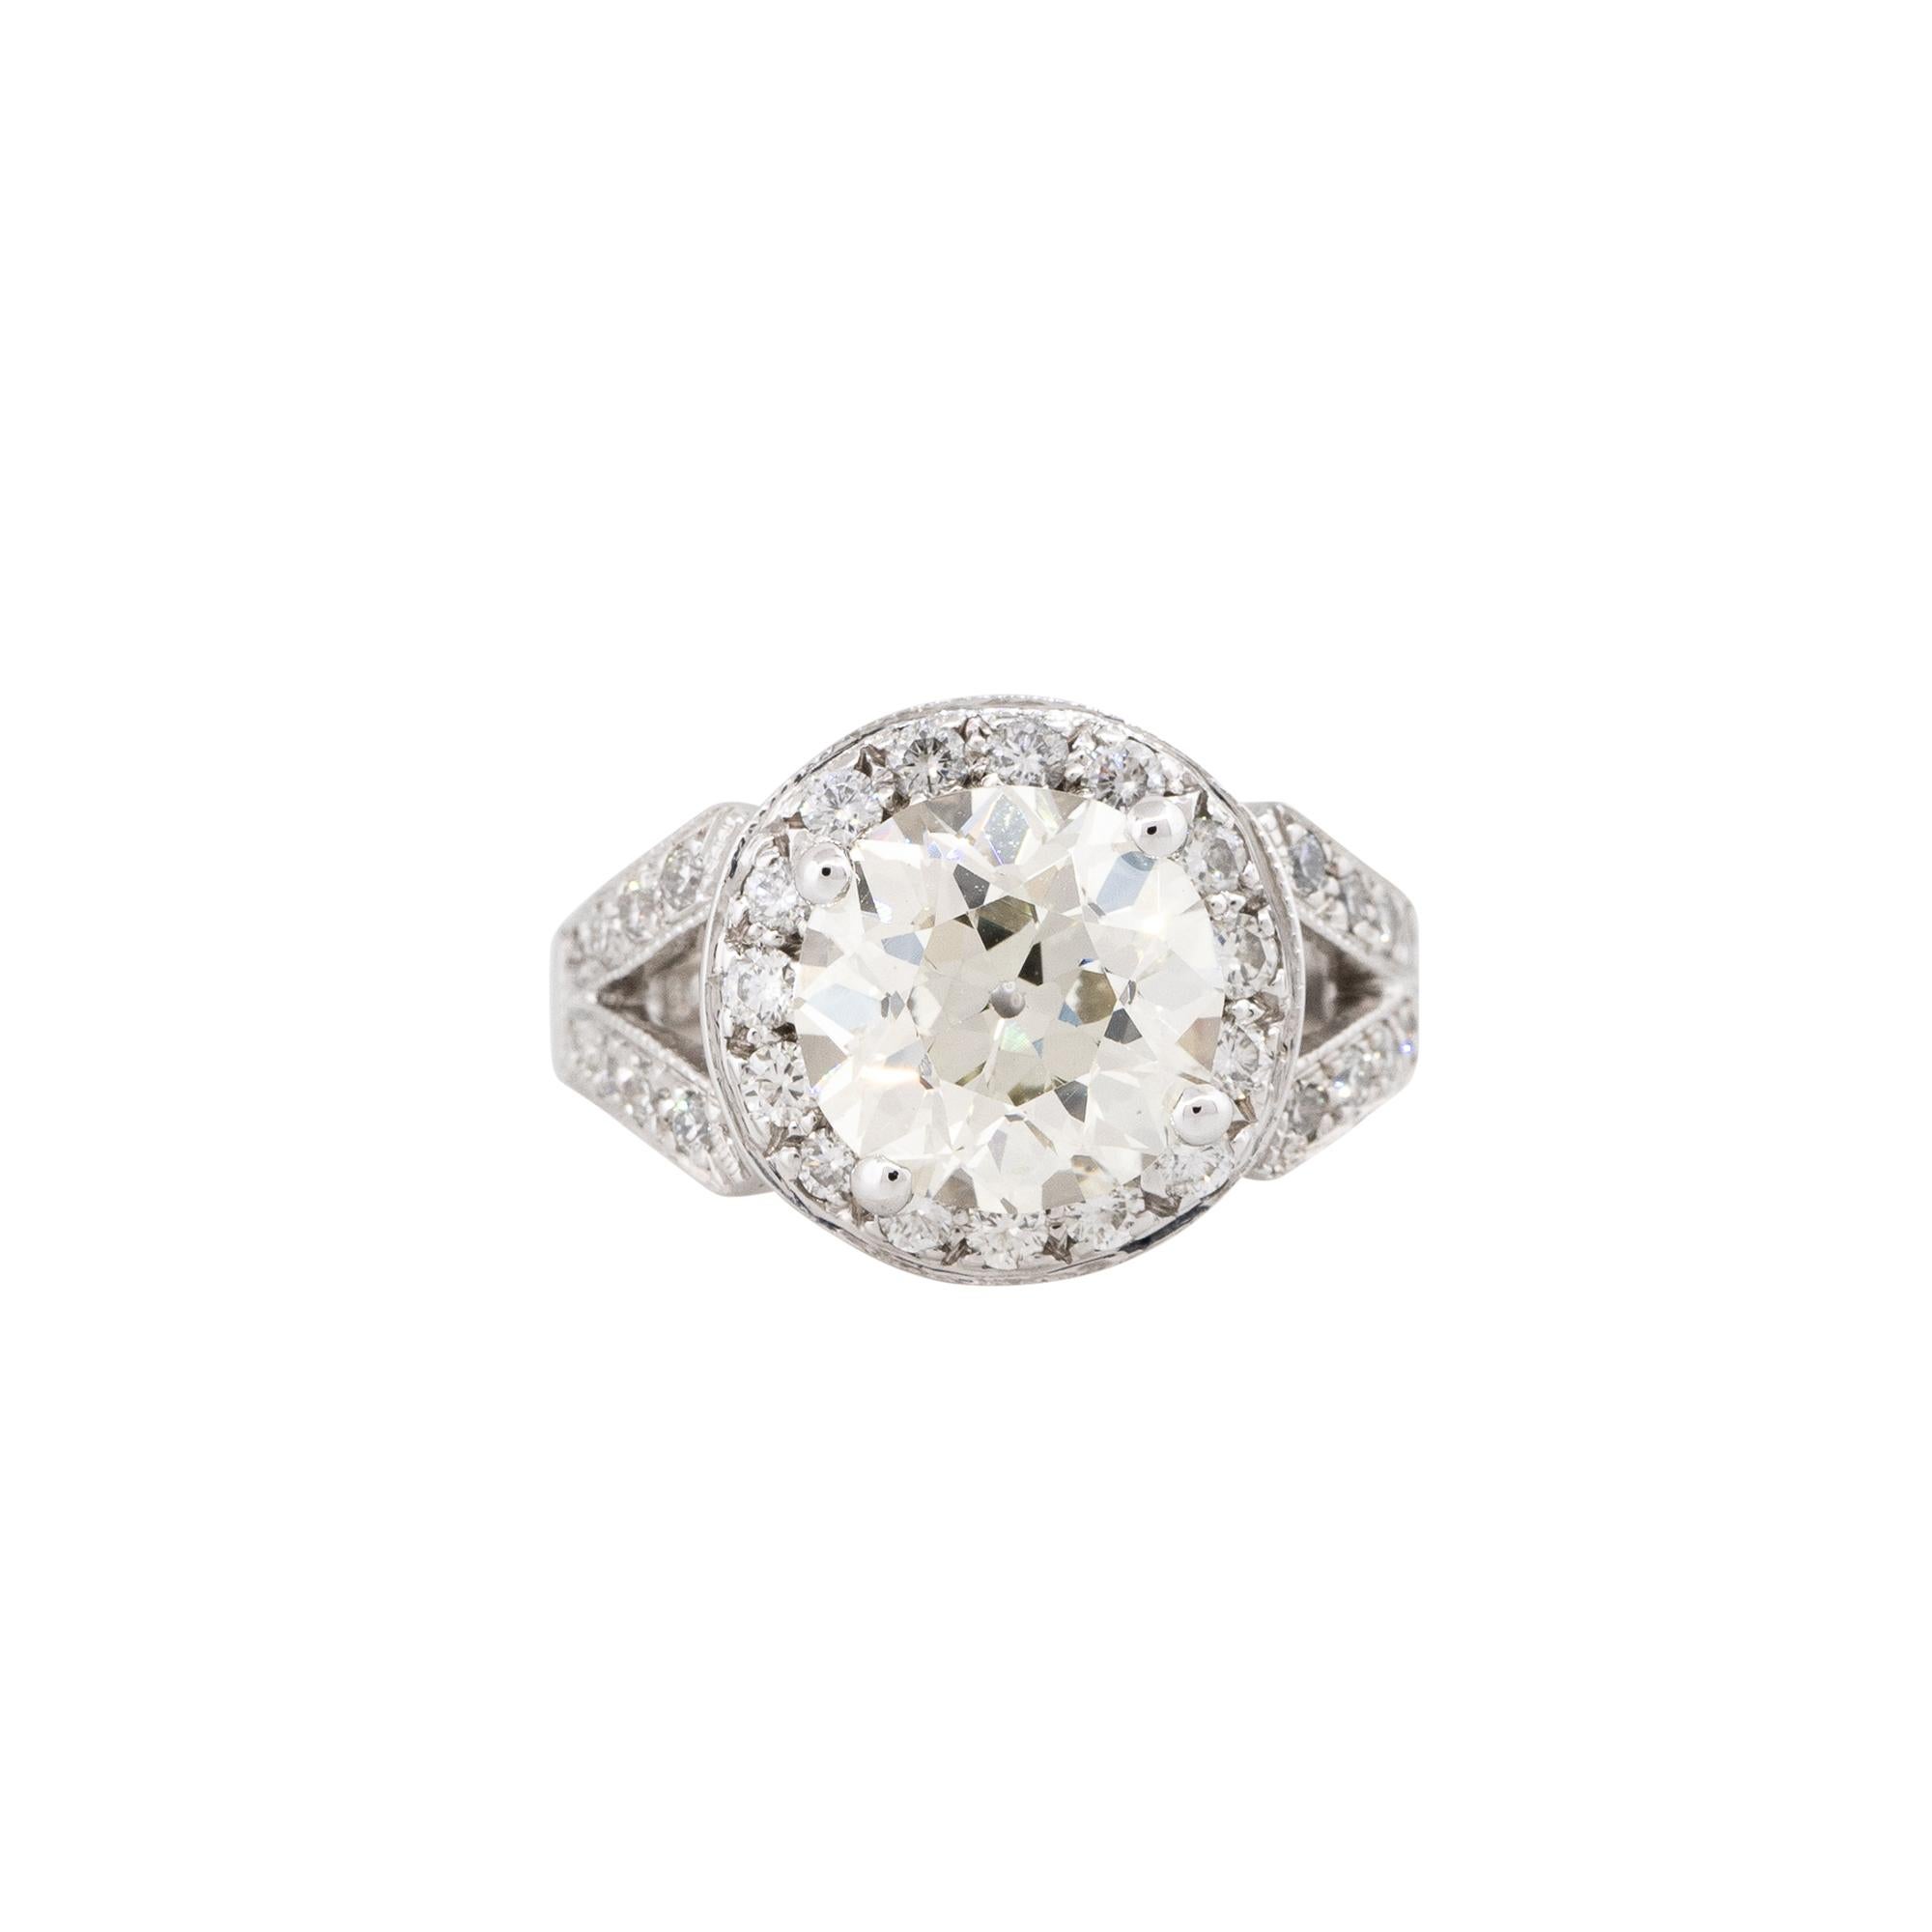 GIA Certified 18k White Gold 3.38ctw Circular Brilliant Diamond Halo Engagement Ring

This GIA certified 3.38 carat diamond halo engagement ring is timeless and elegant. The centerpiece of the ring is a circular brilliant cut diamond, weighing in at